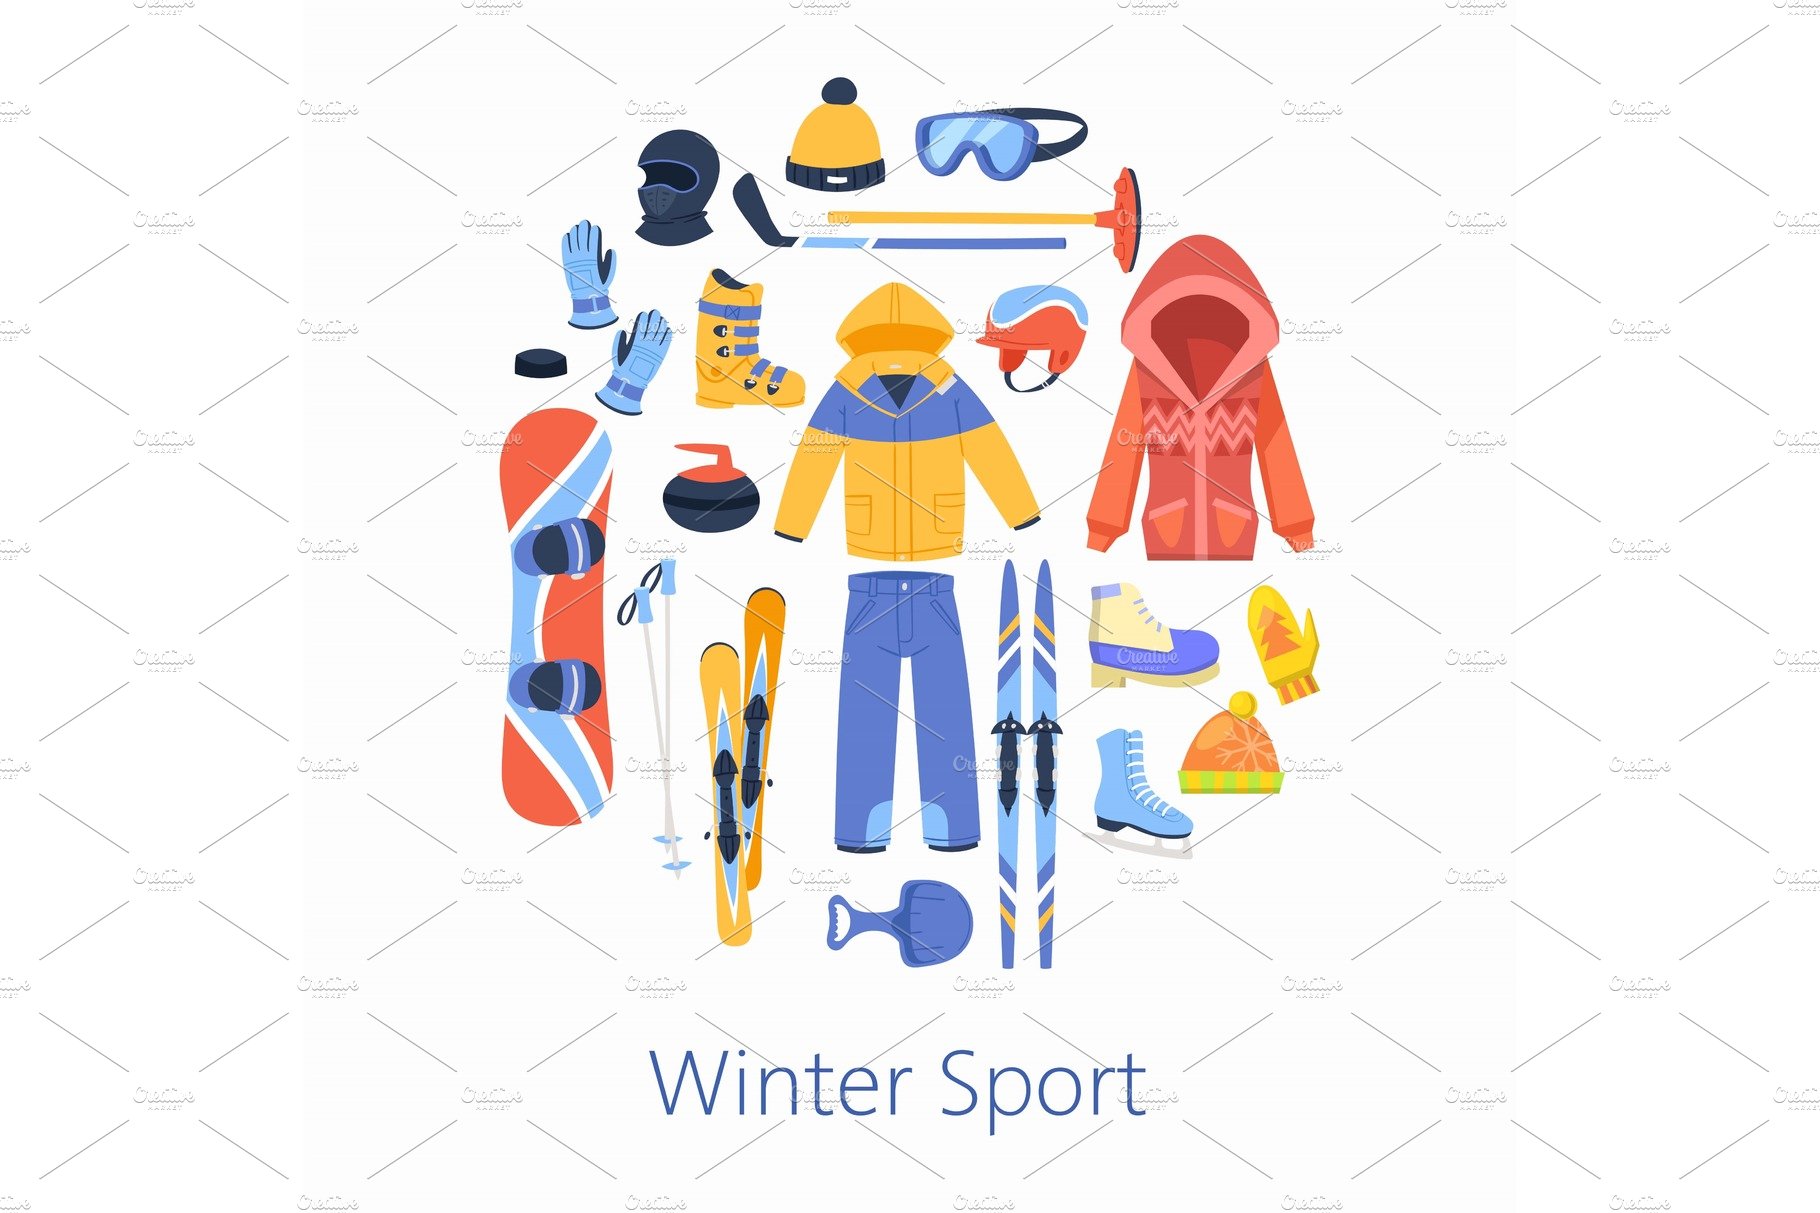 Winter sports accessories vector cover image.